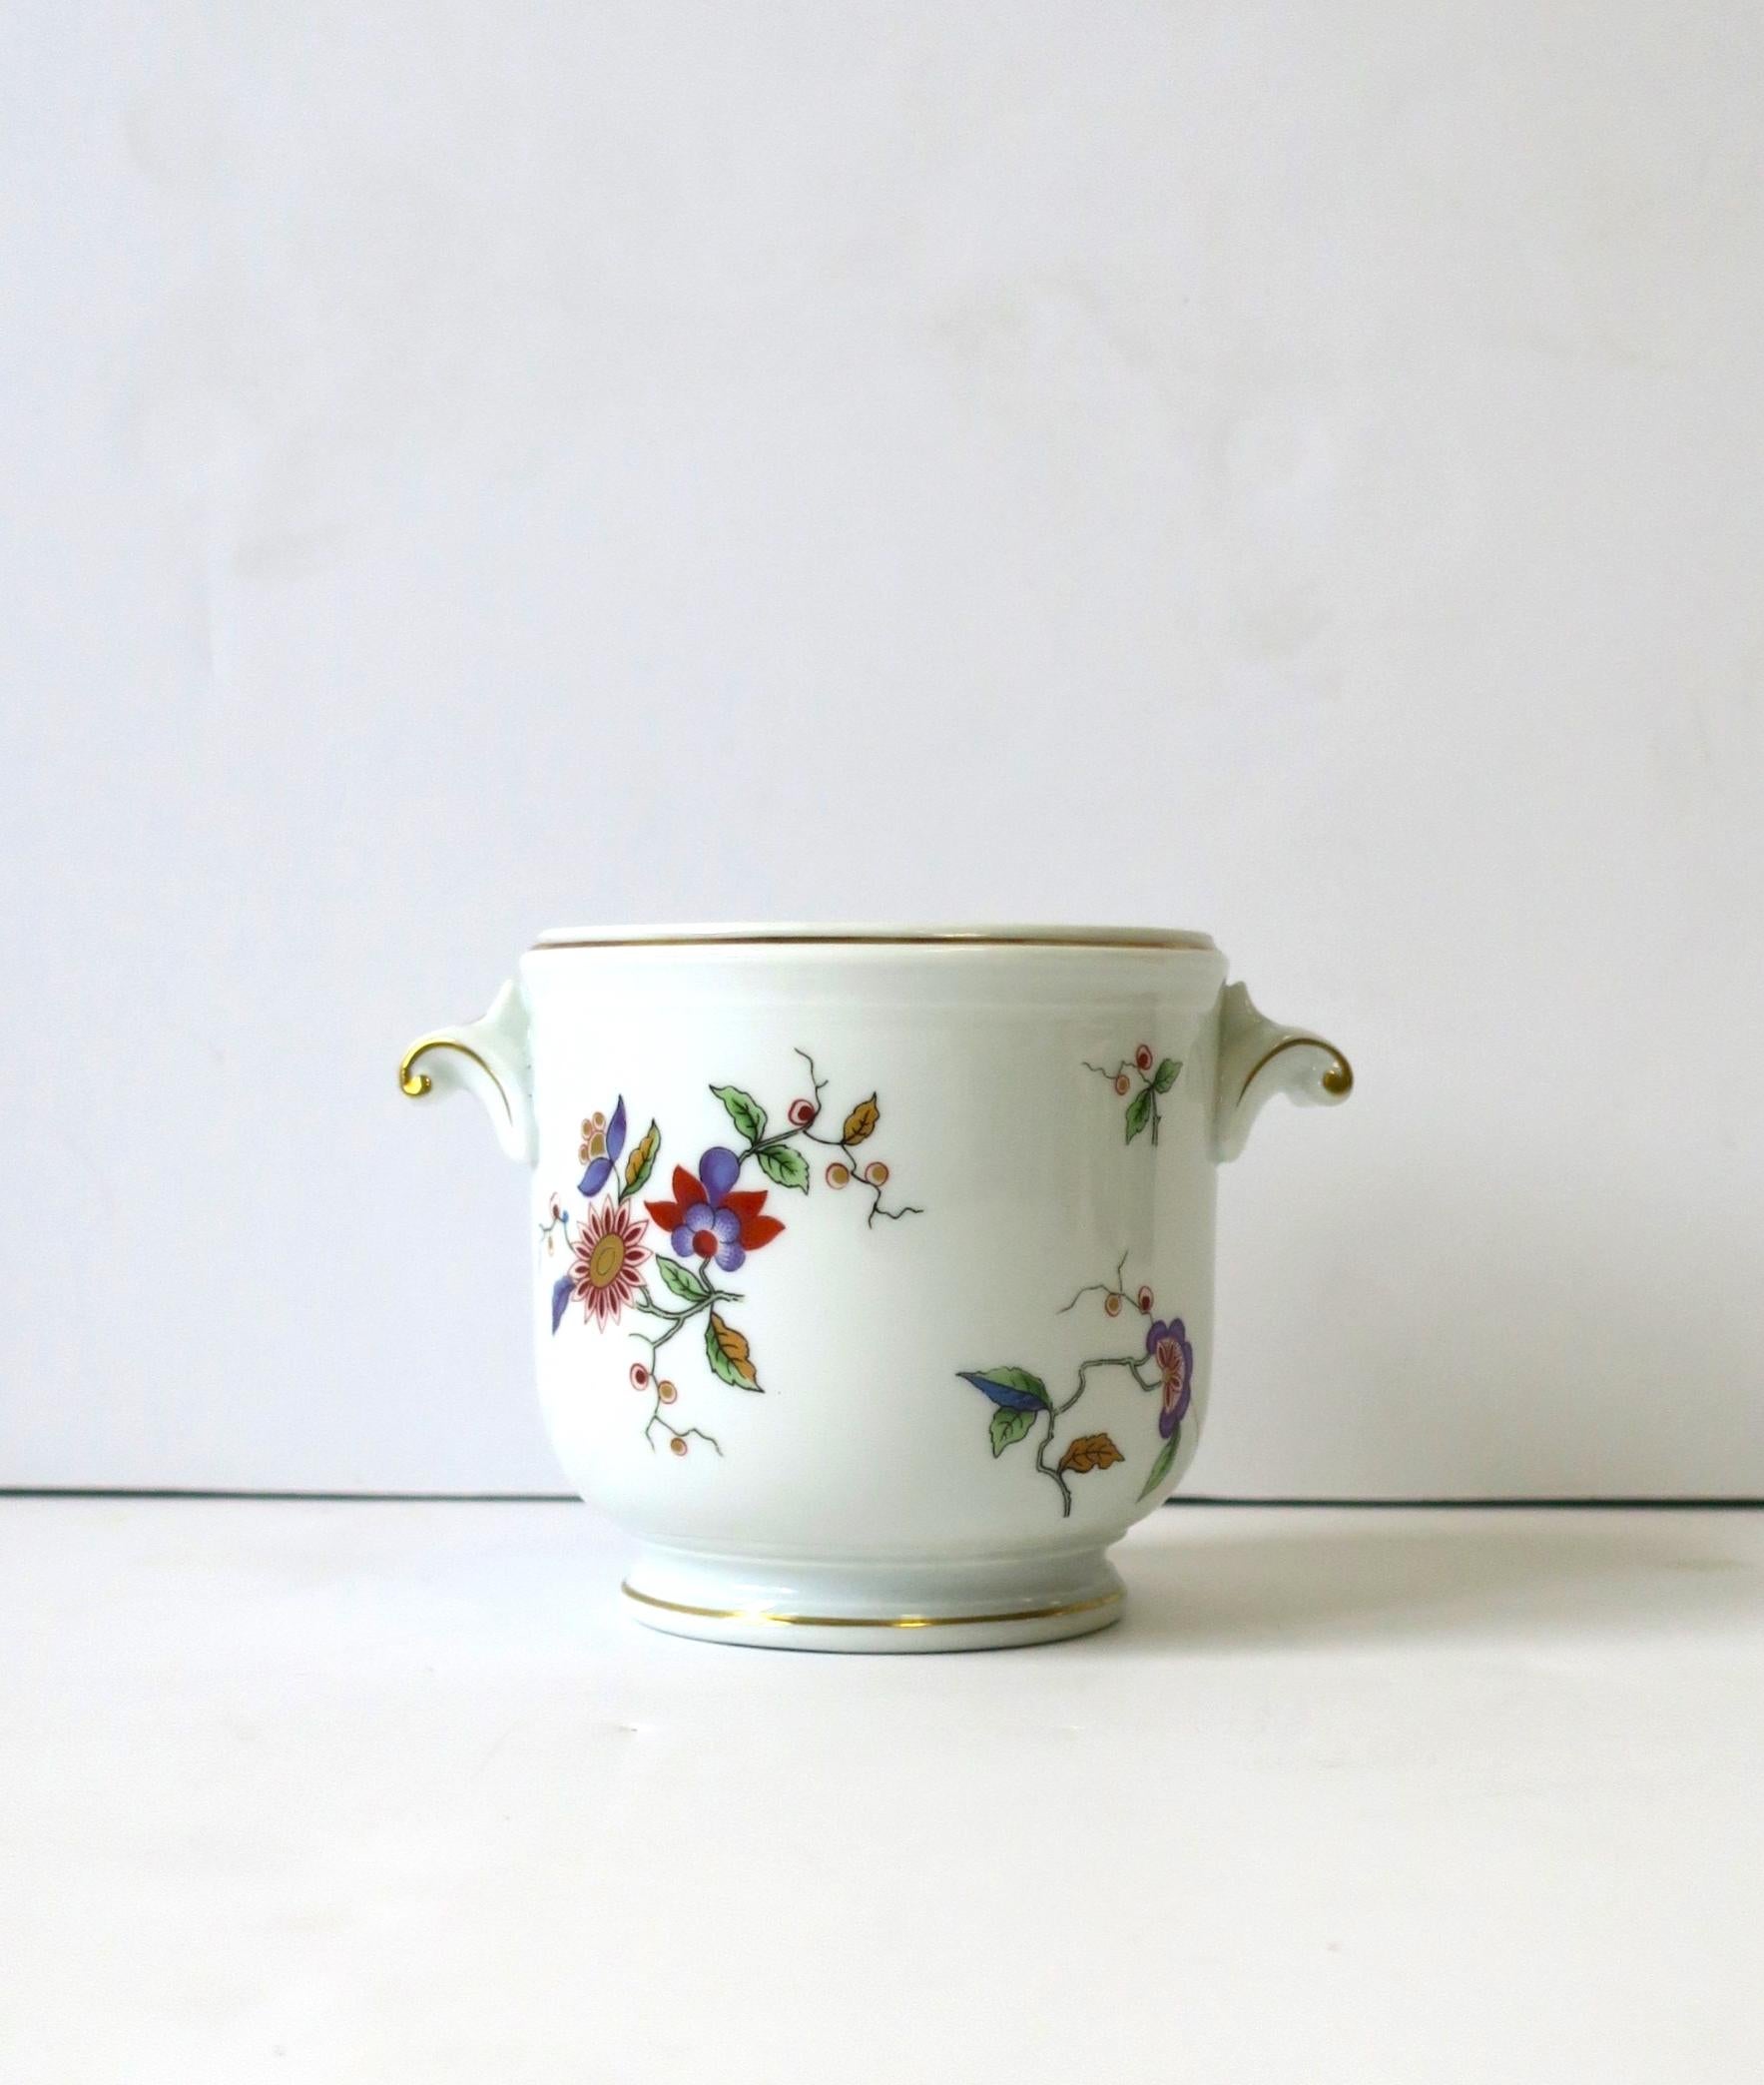 A beautiful, small, vintage Richard Ginori porcelain cachepot with gold and multi-colored floral decoration, circa mid-20th century, Italy. Gold accented handles on sides. Piece can hold a flower or plant (as demonstrated.) Maker's mark on bottom as